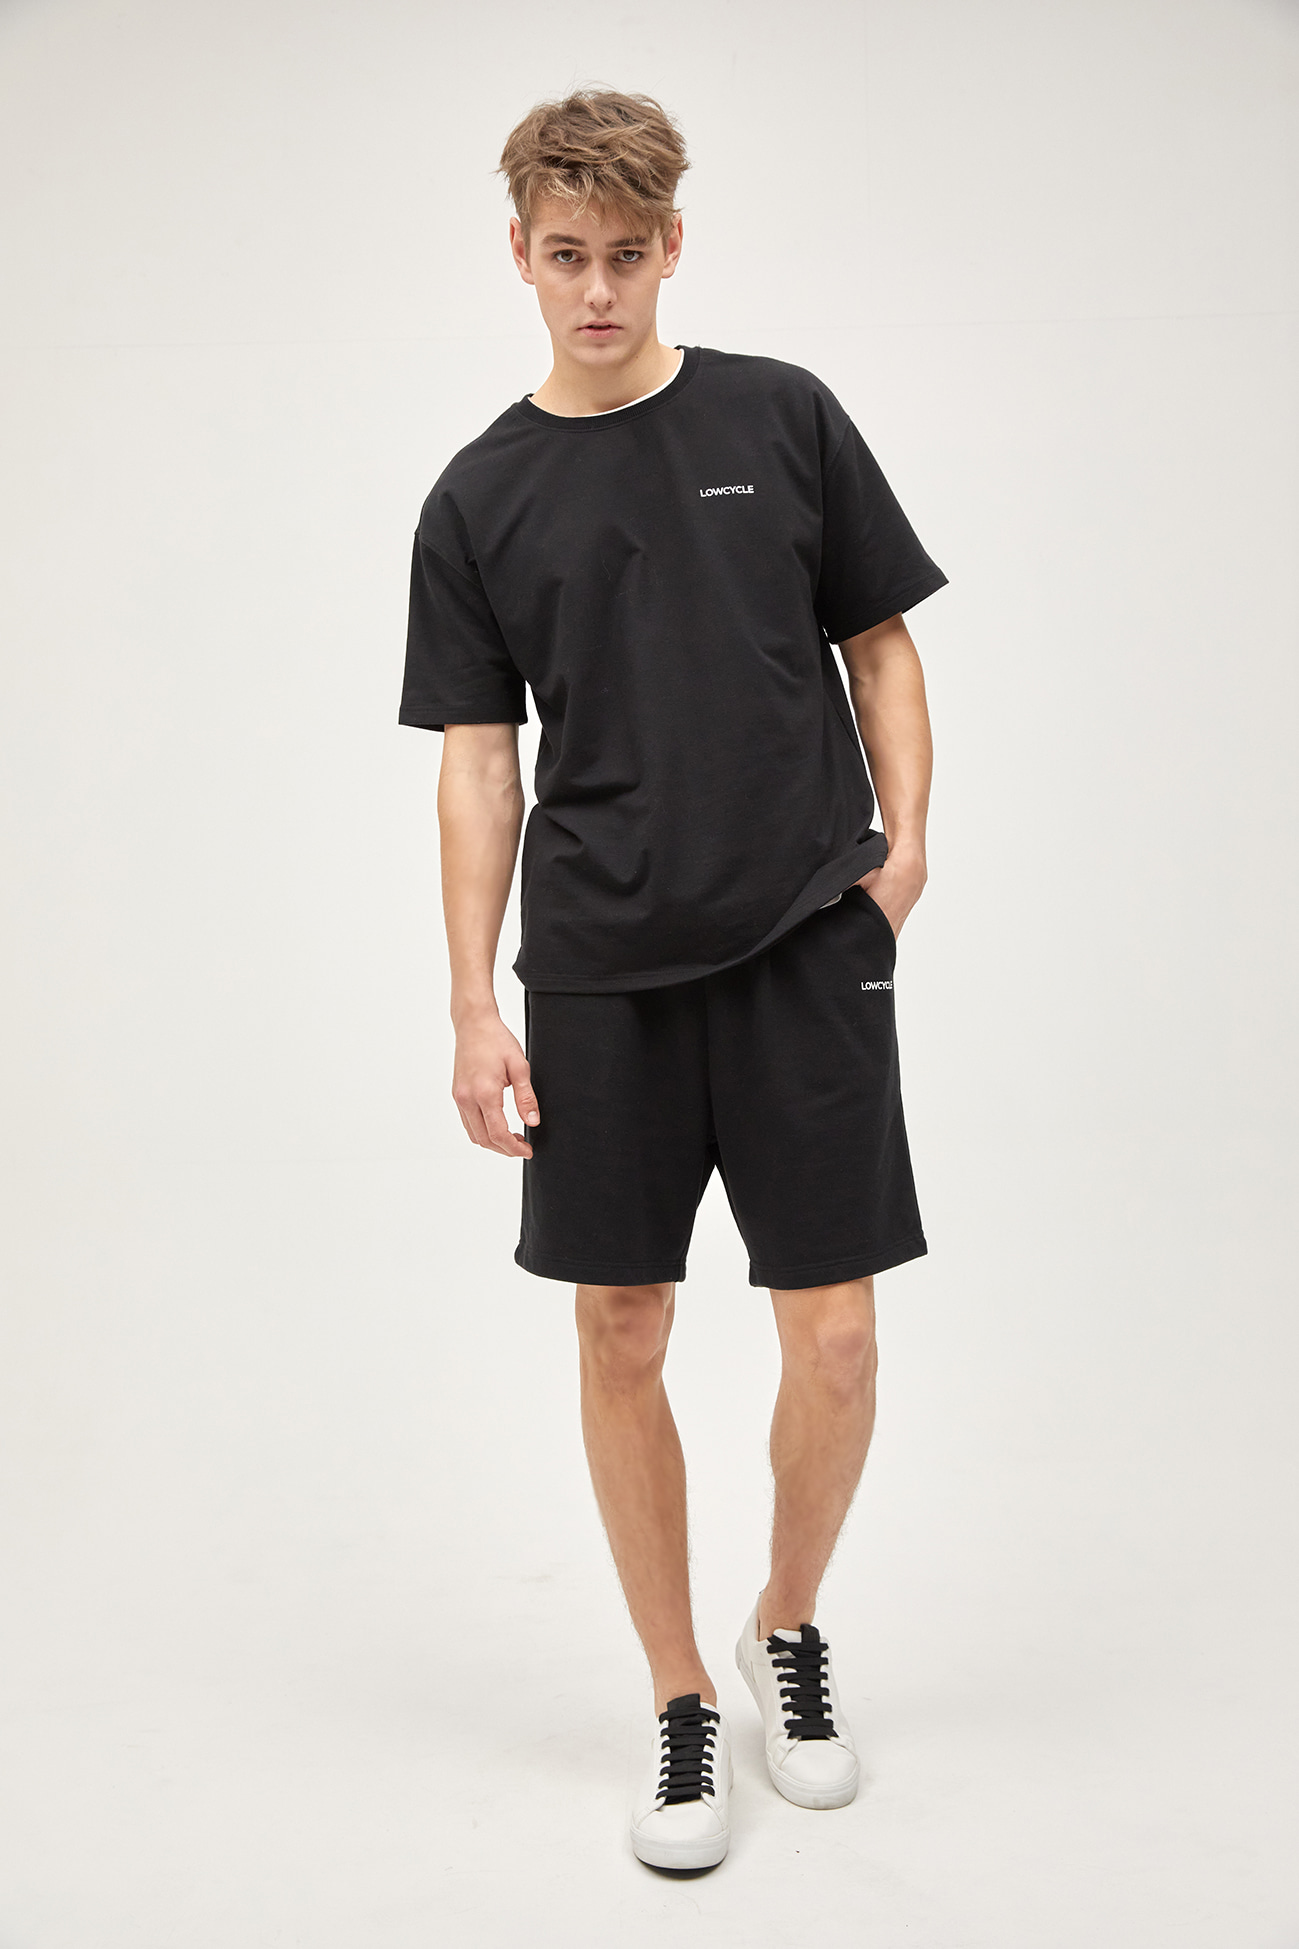 RECYCLE BLACK SHORT SLEEVED T-SHIRT